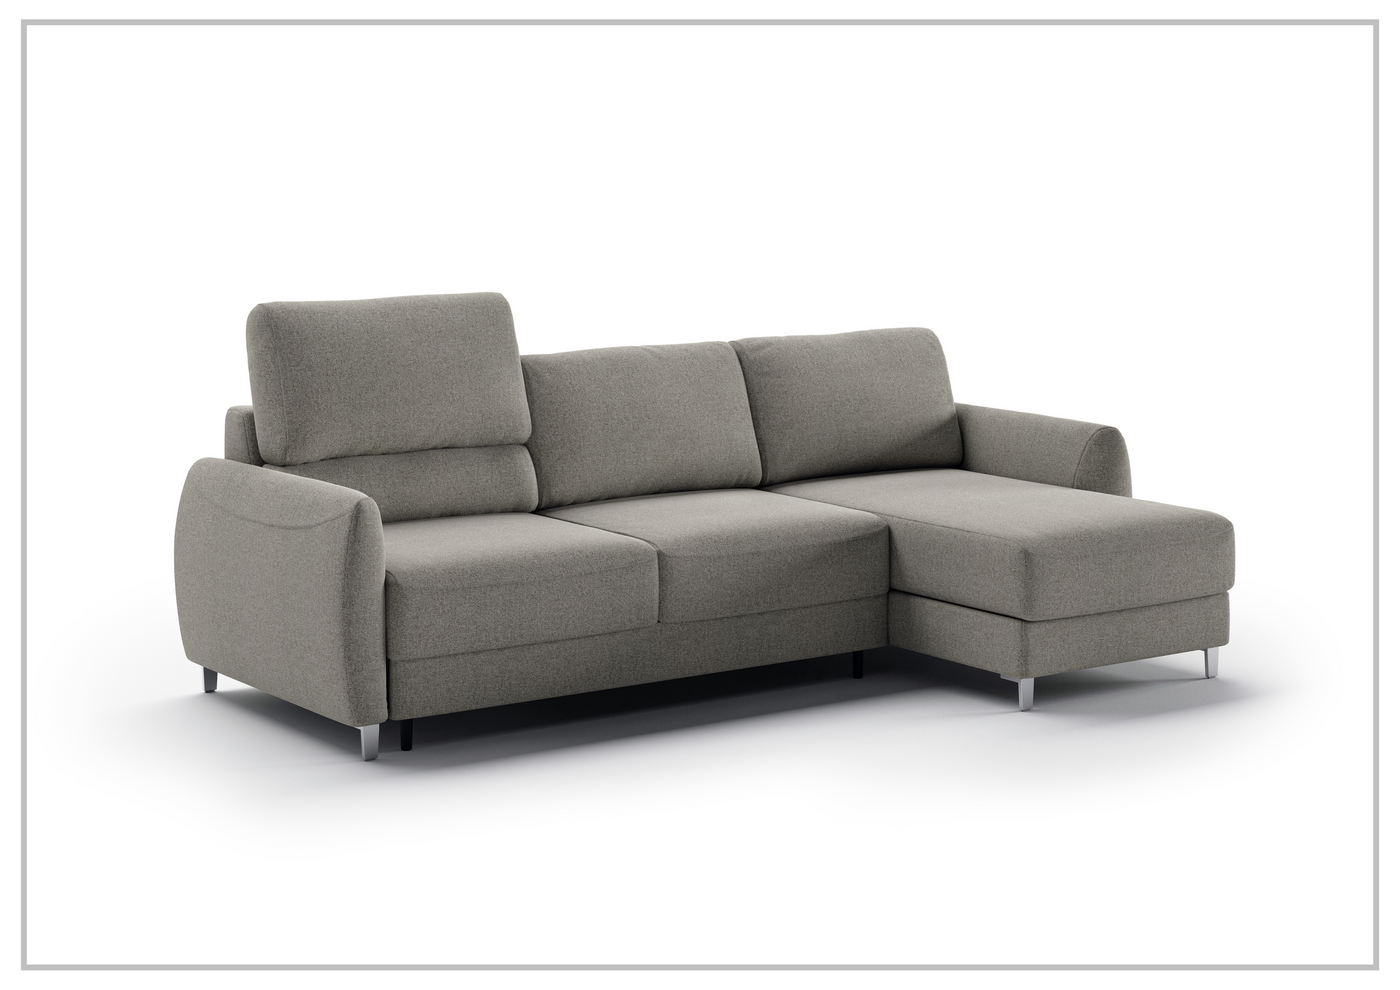 Luonto Delta Fabric Full XL Sectional Sofa Sleeper with Storage